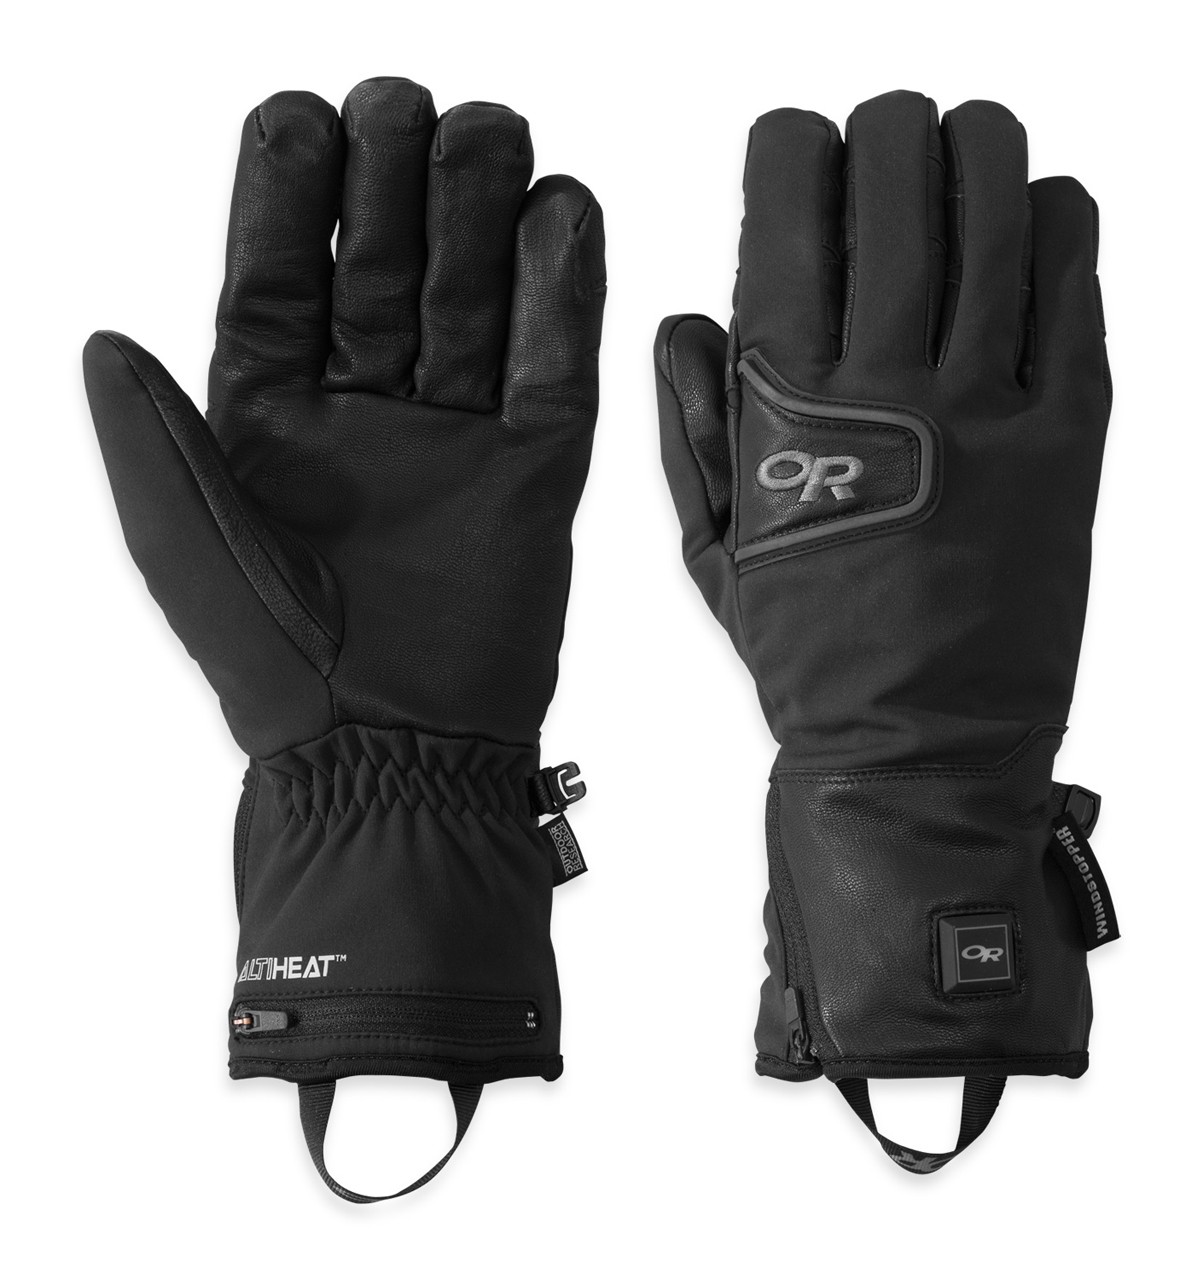 OR Stormtracker Heated Gloves